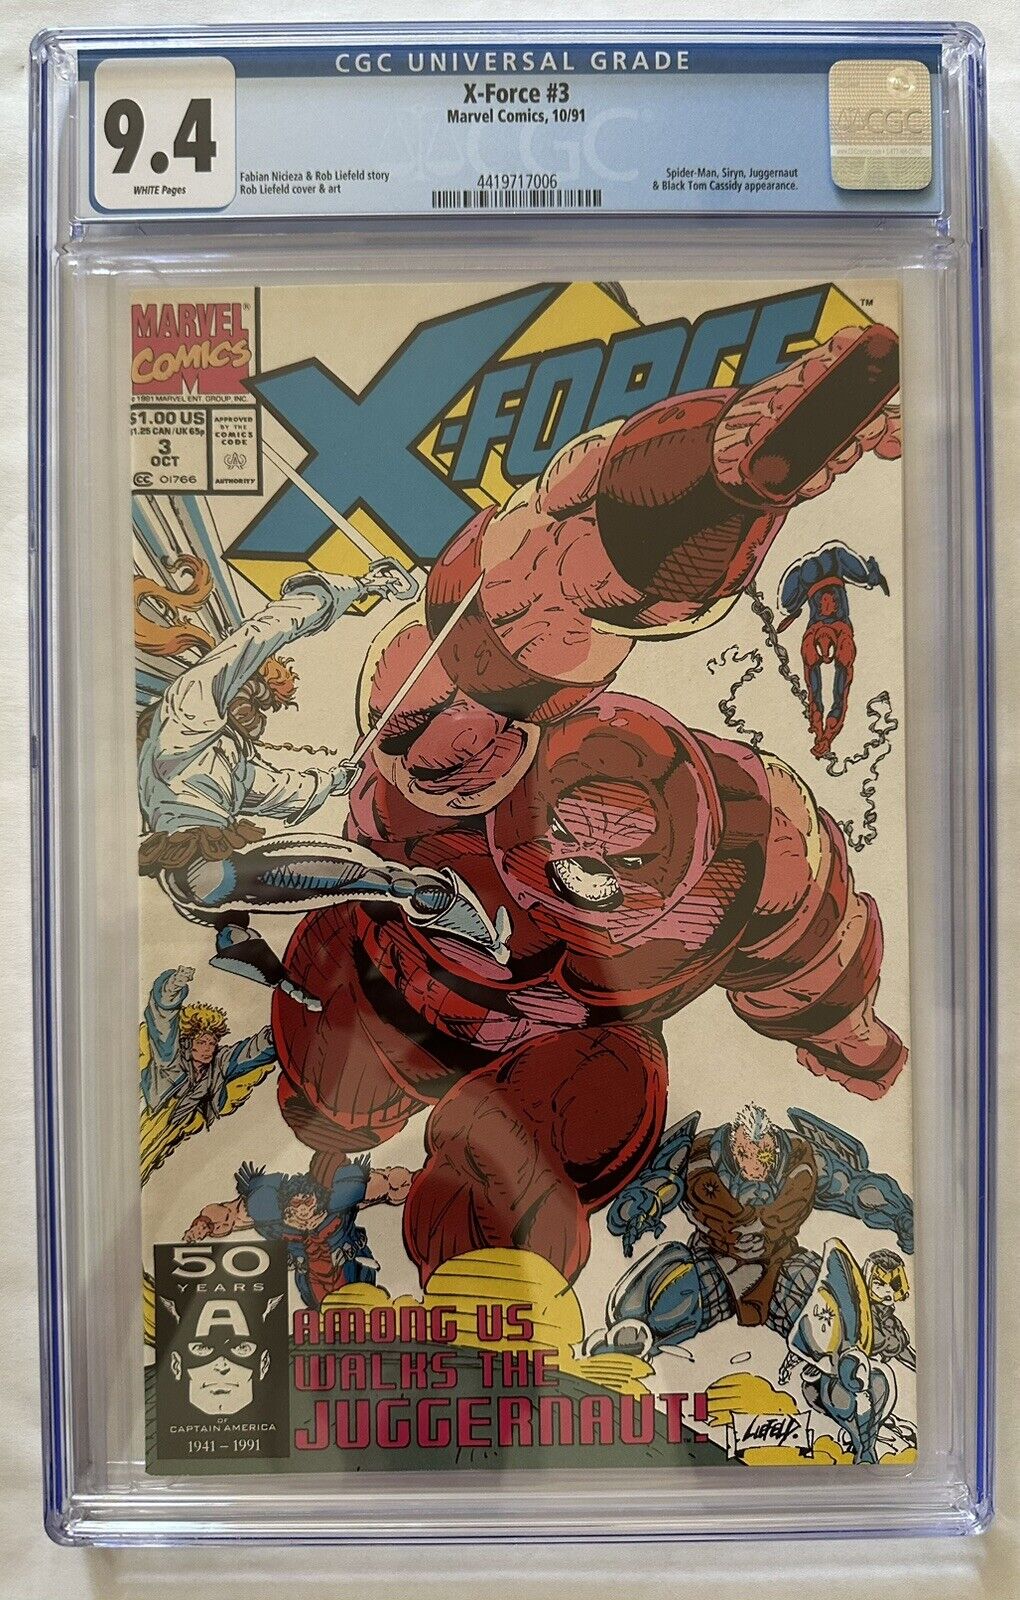 X-FORCE #3 ~ CGC 9.4 ~ Rob Liefeld cover and art ~ Spider-Man ap ~ Marvel (1991)